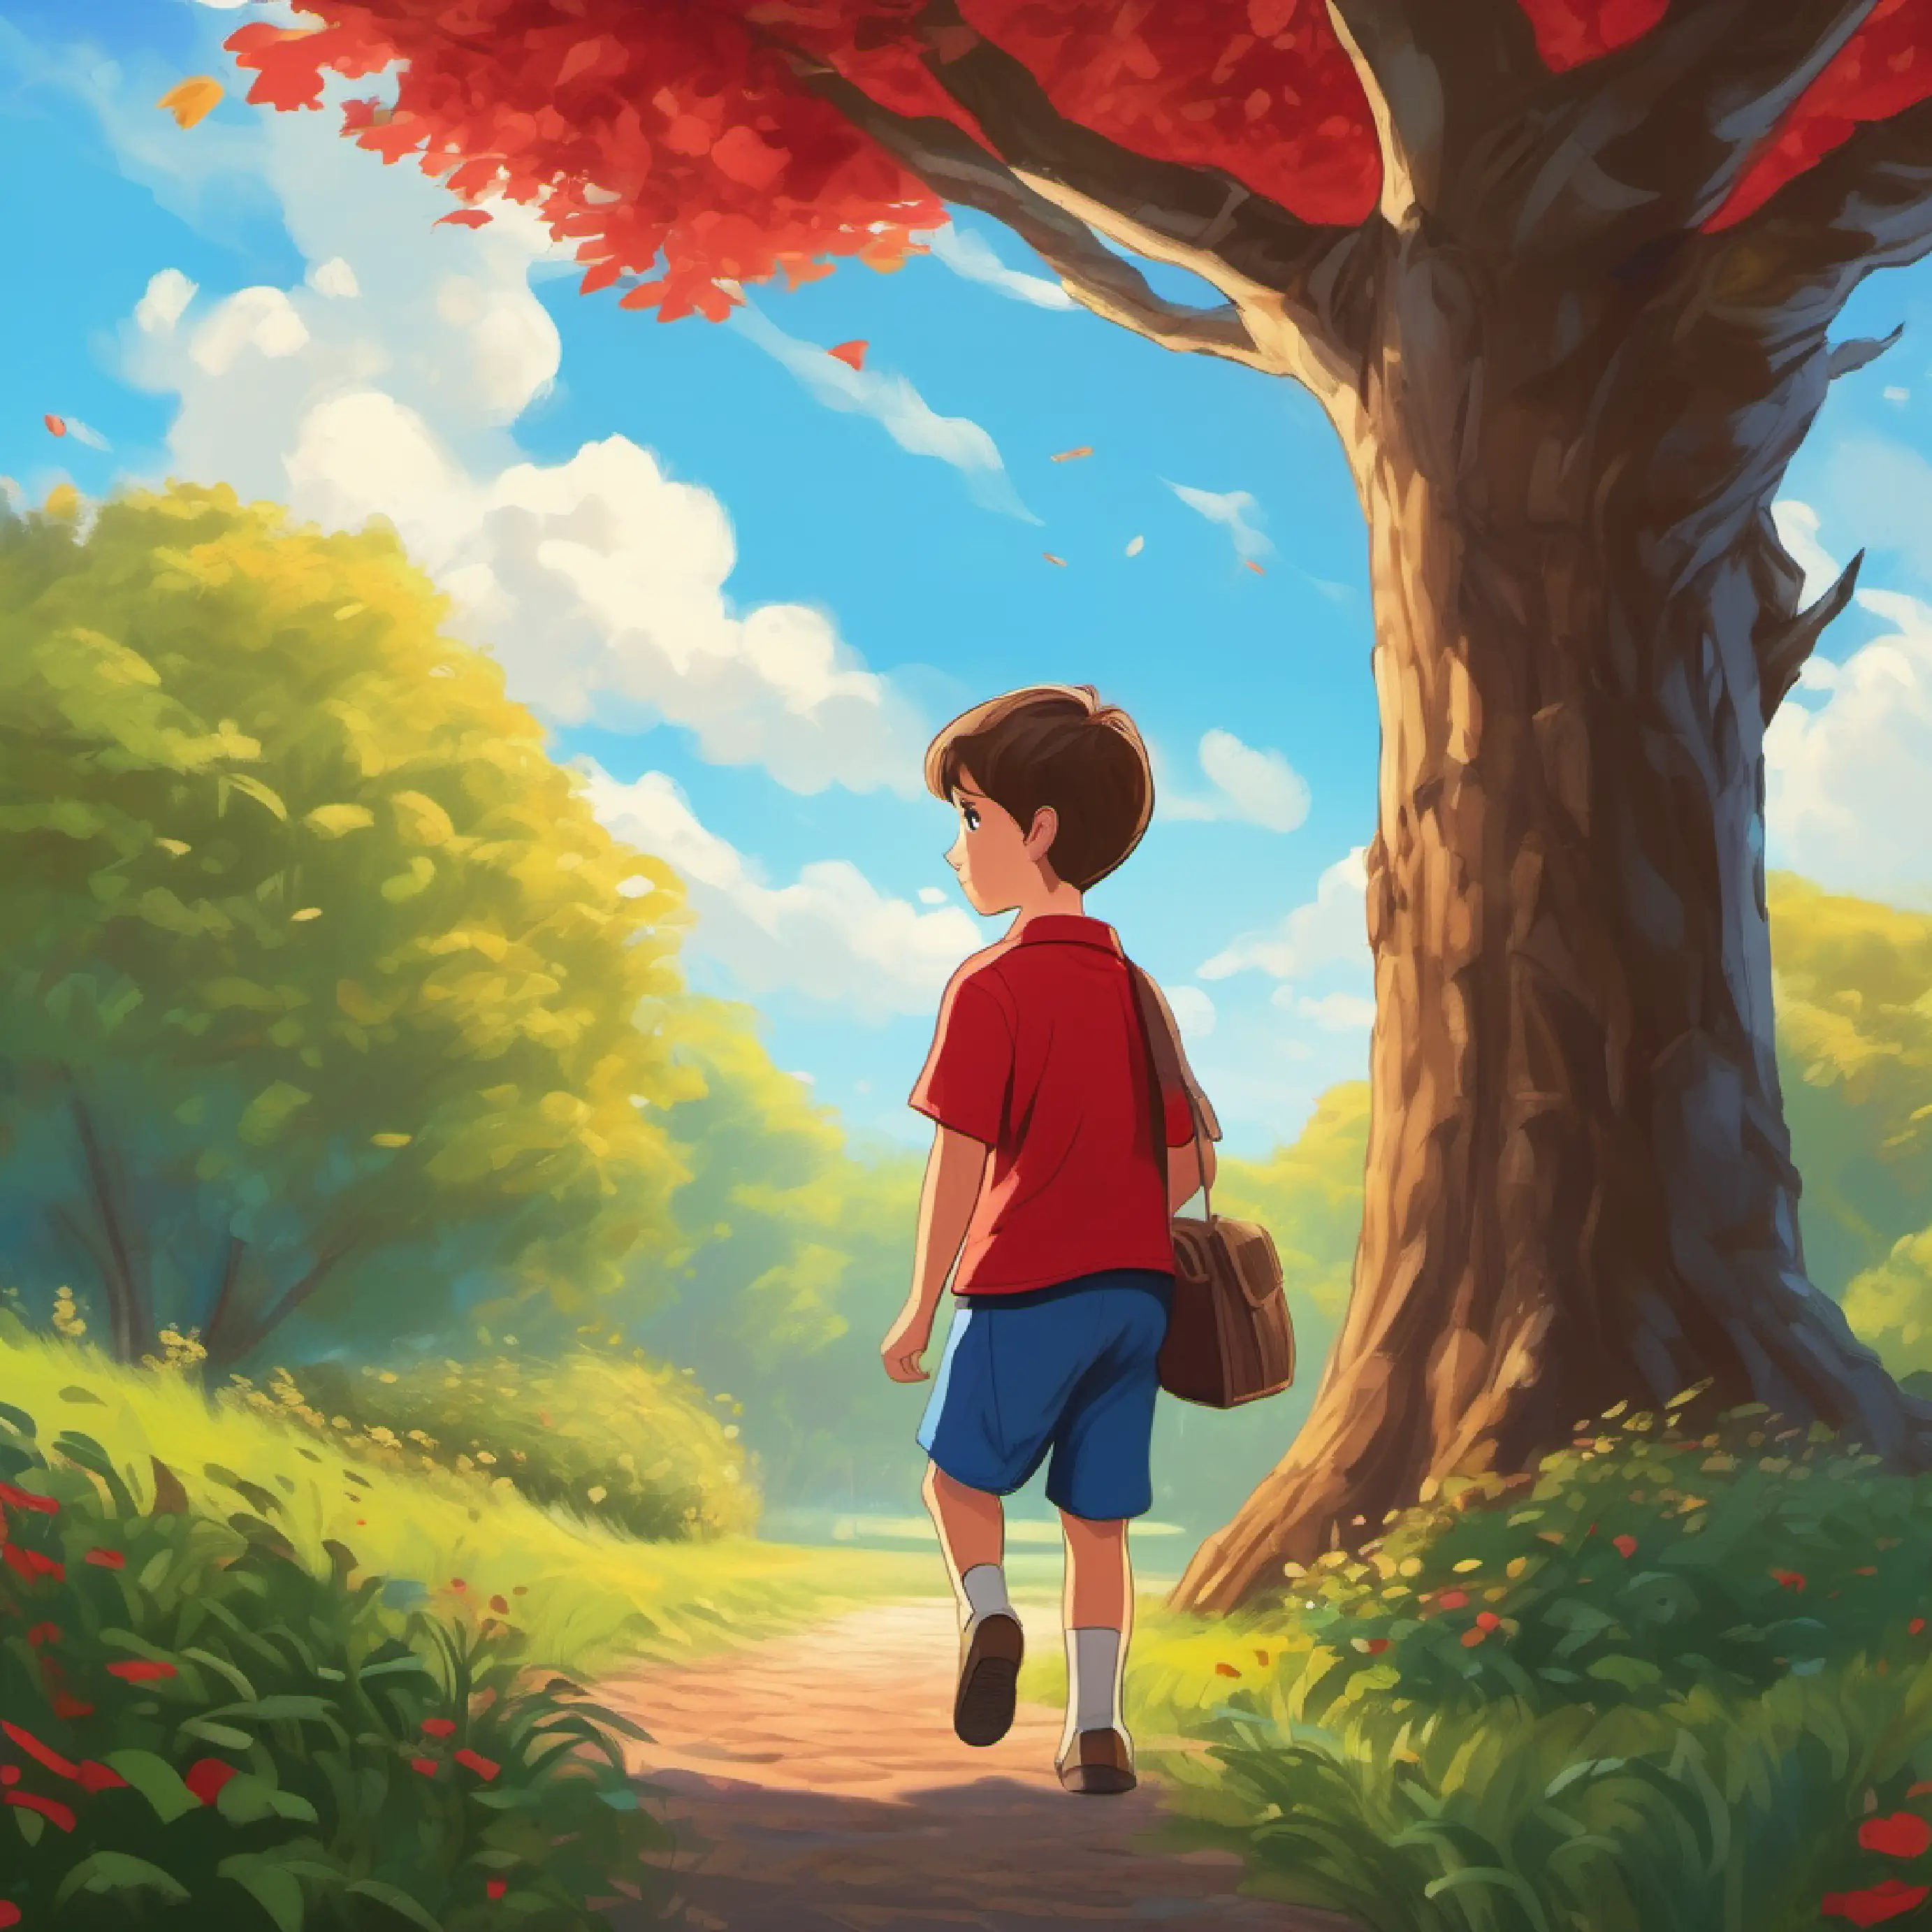 The school bell rings for recess and Young boy, short brown hair, bright blue eyes, wearing a red shirt heads to the tree determinedly.